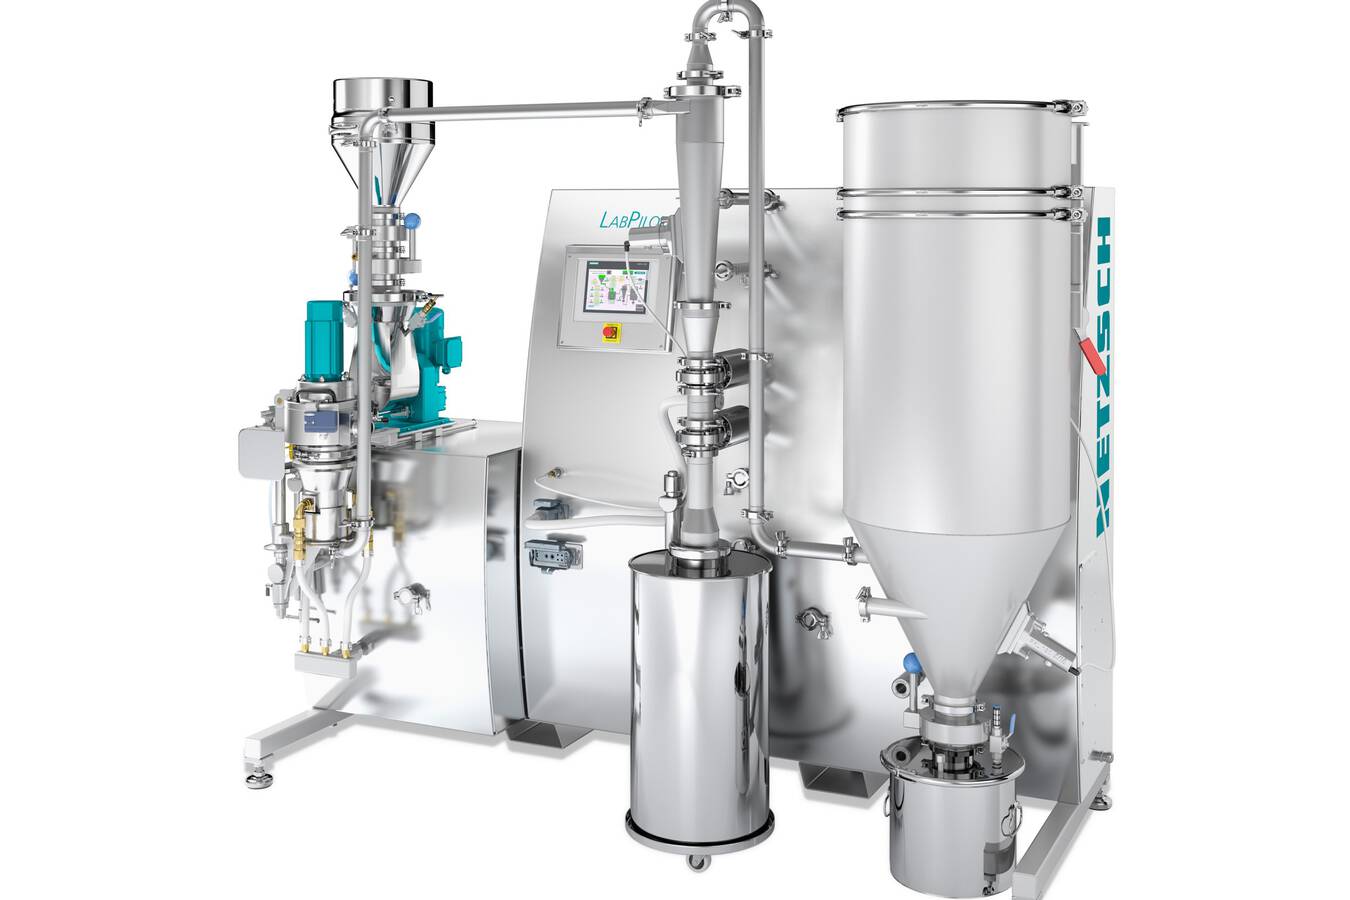 The innovative NETZSCH LabPilot, in a configuration with a CGS 10 fluidized bed jet mill 